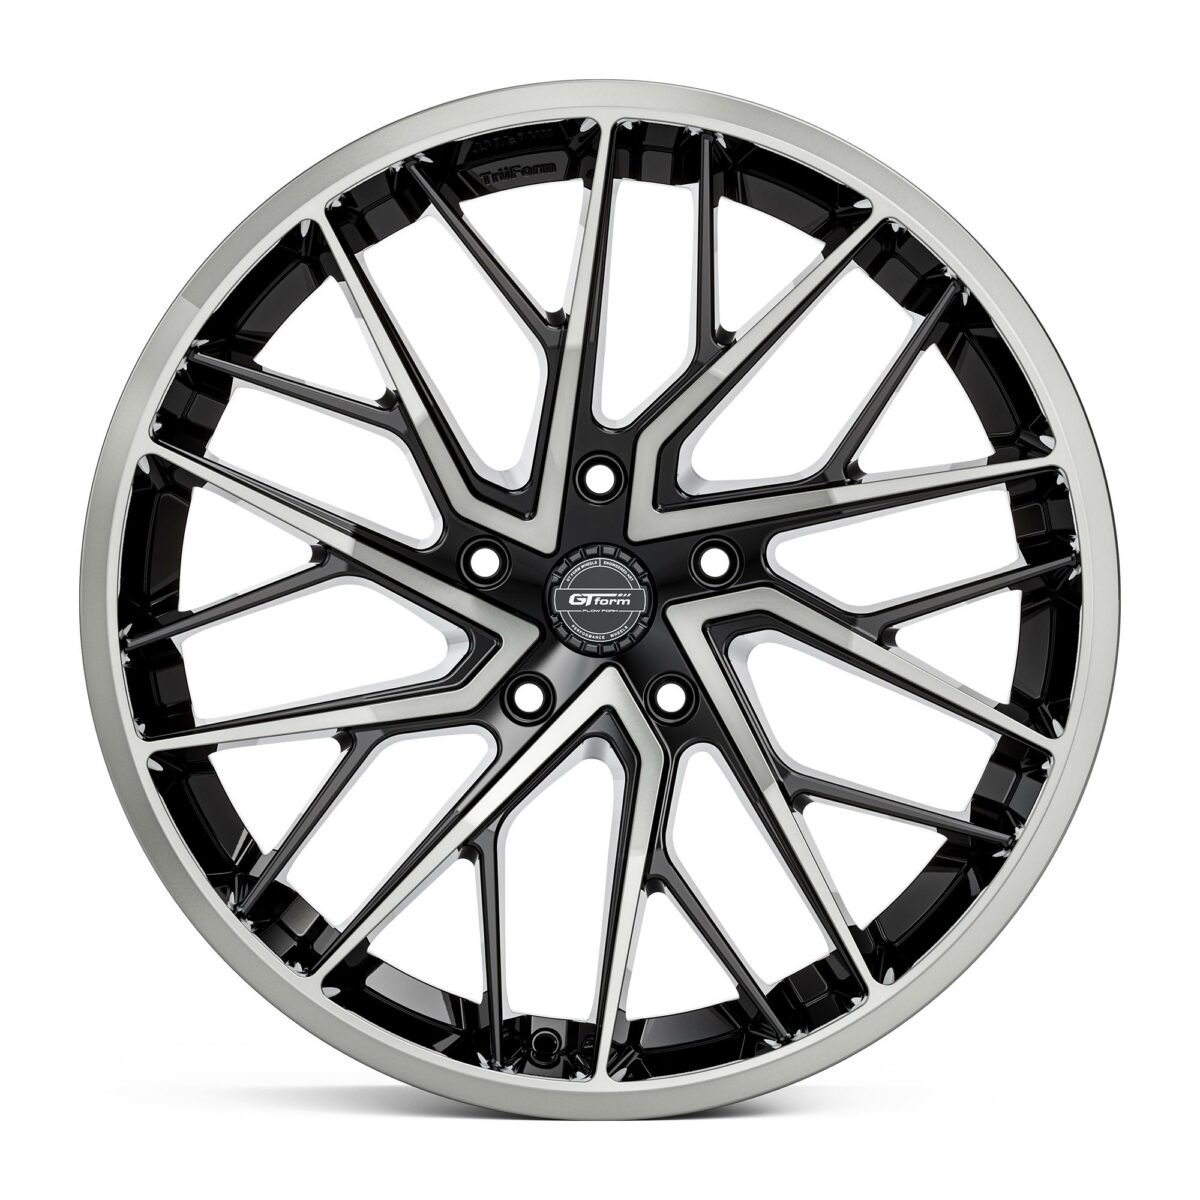 GT Form Vertex Gloss Black Tinted Staggered Rims 20 inch Performance Wheels